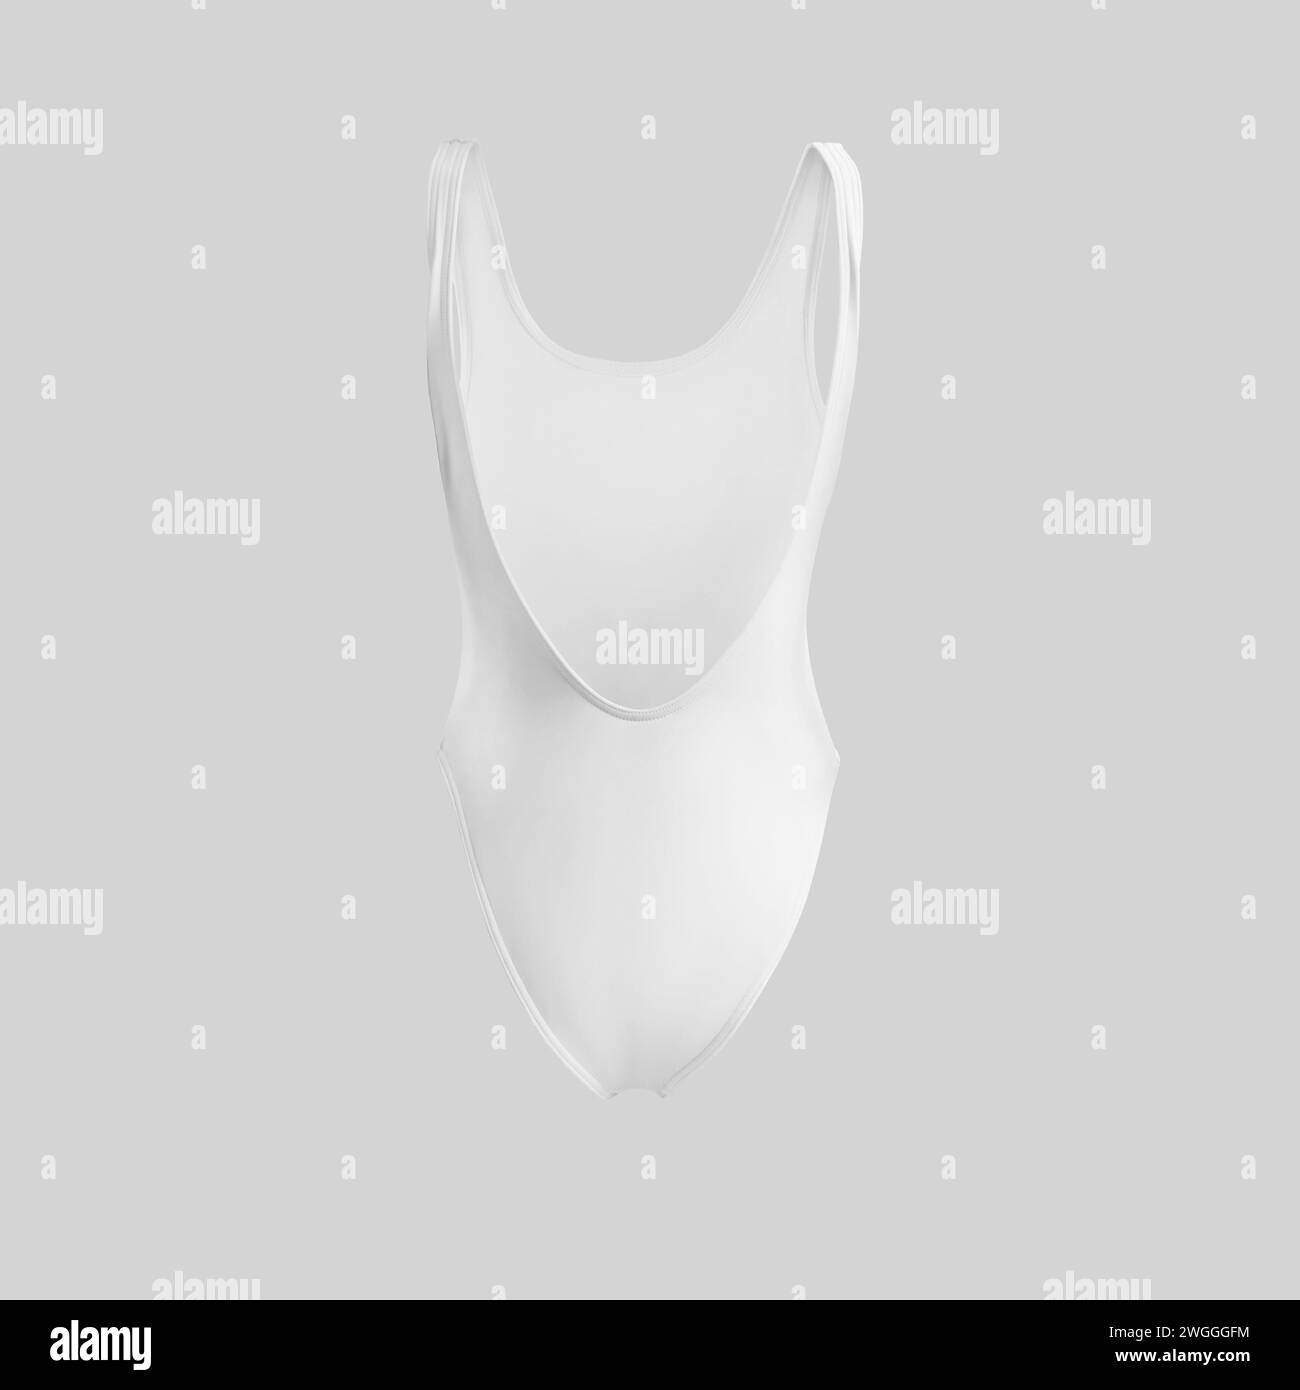 White sports one-piece swimsuit template 3D rendering, women's bodysuit with round deep neckline behind, isolated on background. Mockup of stylish clo Stock Photo